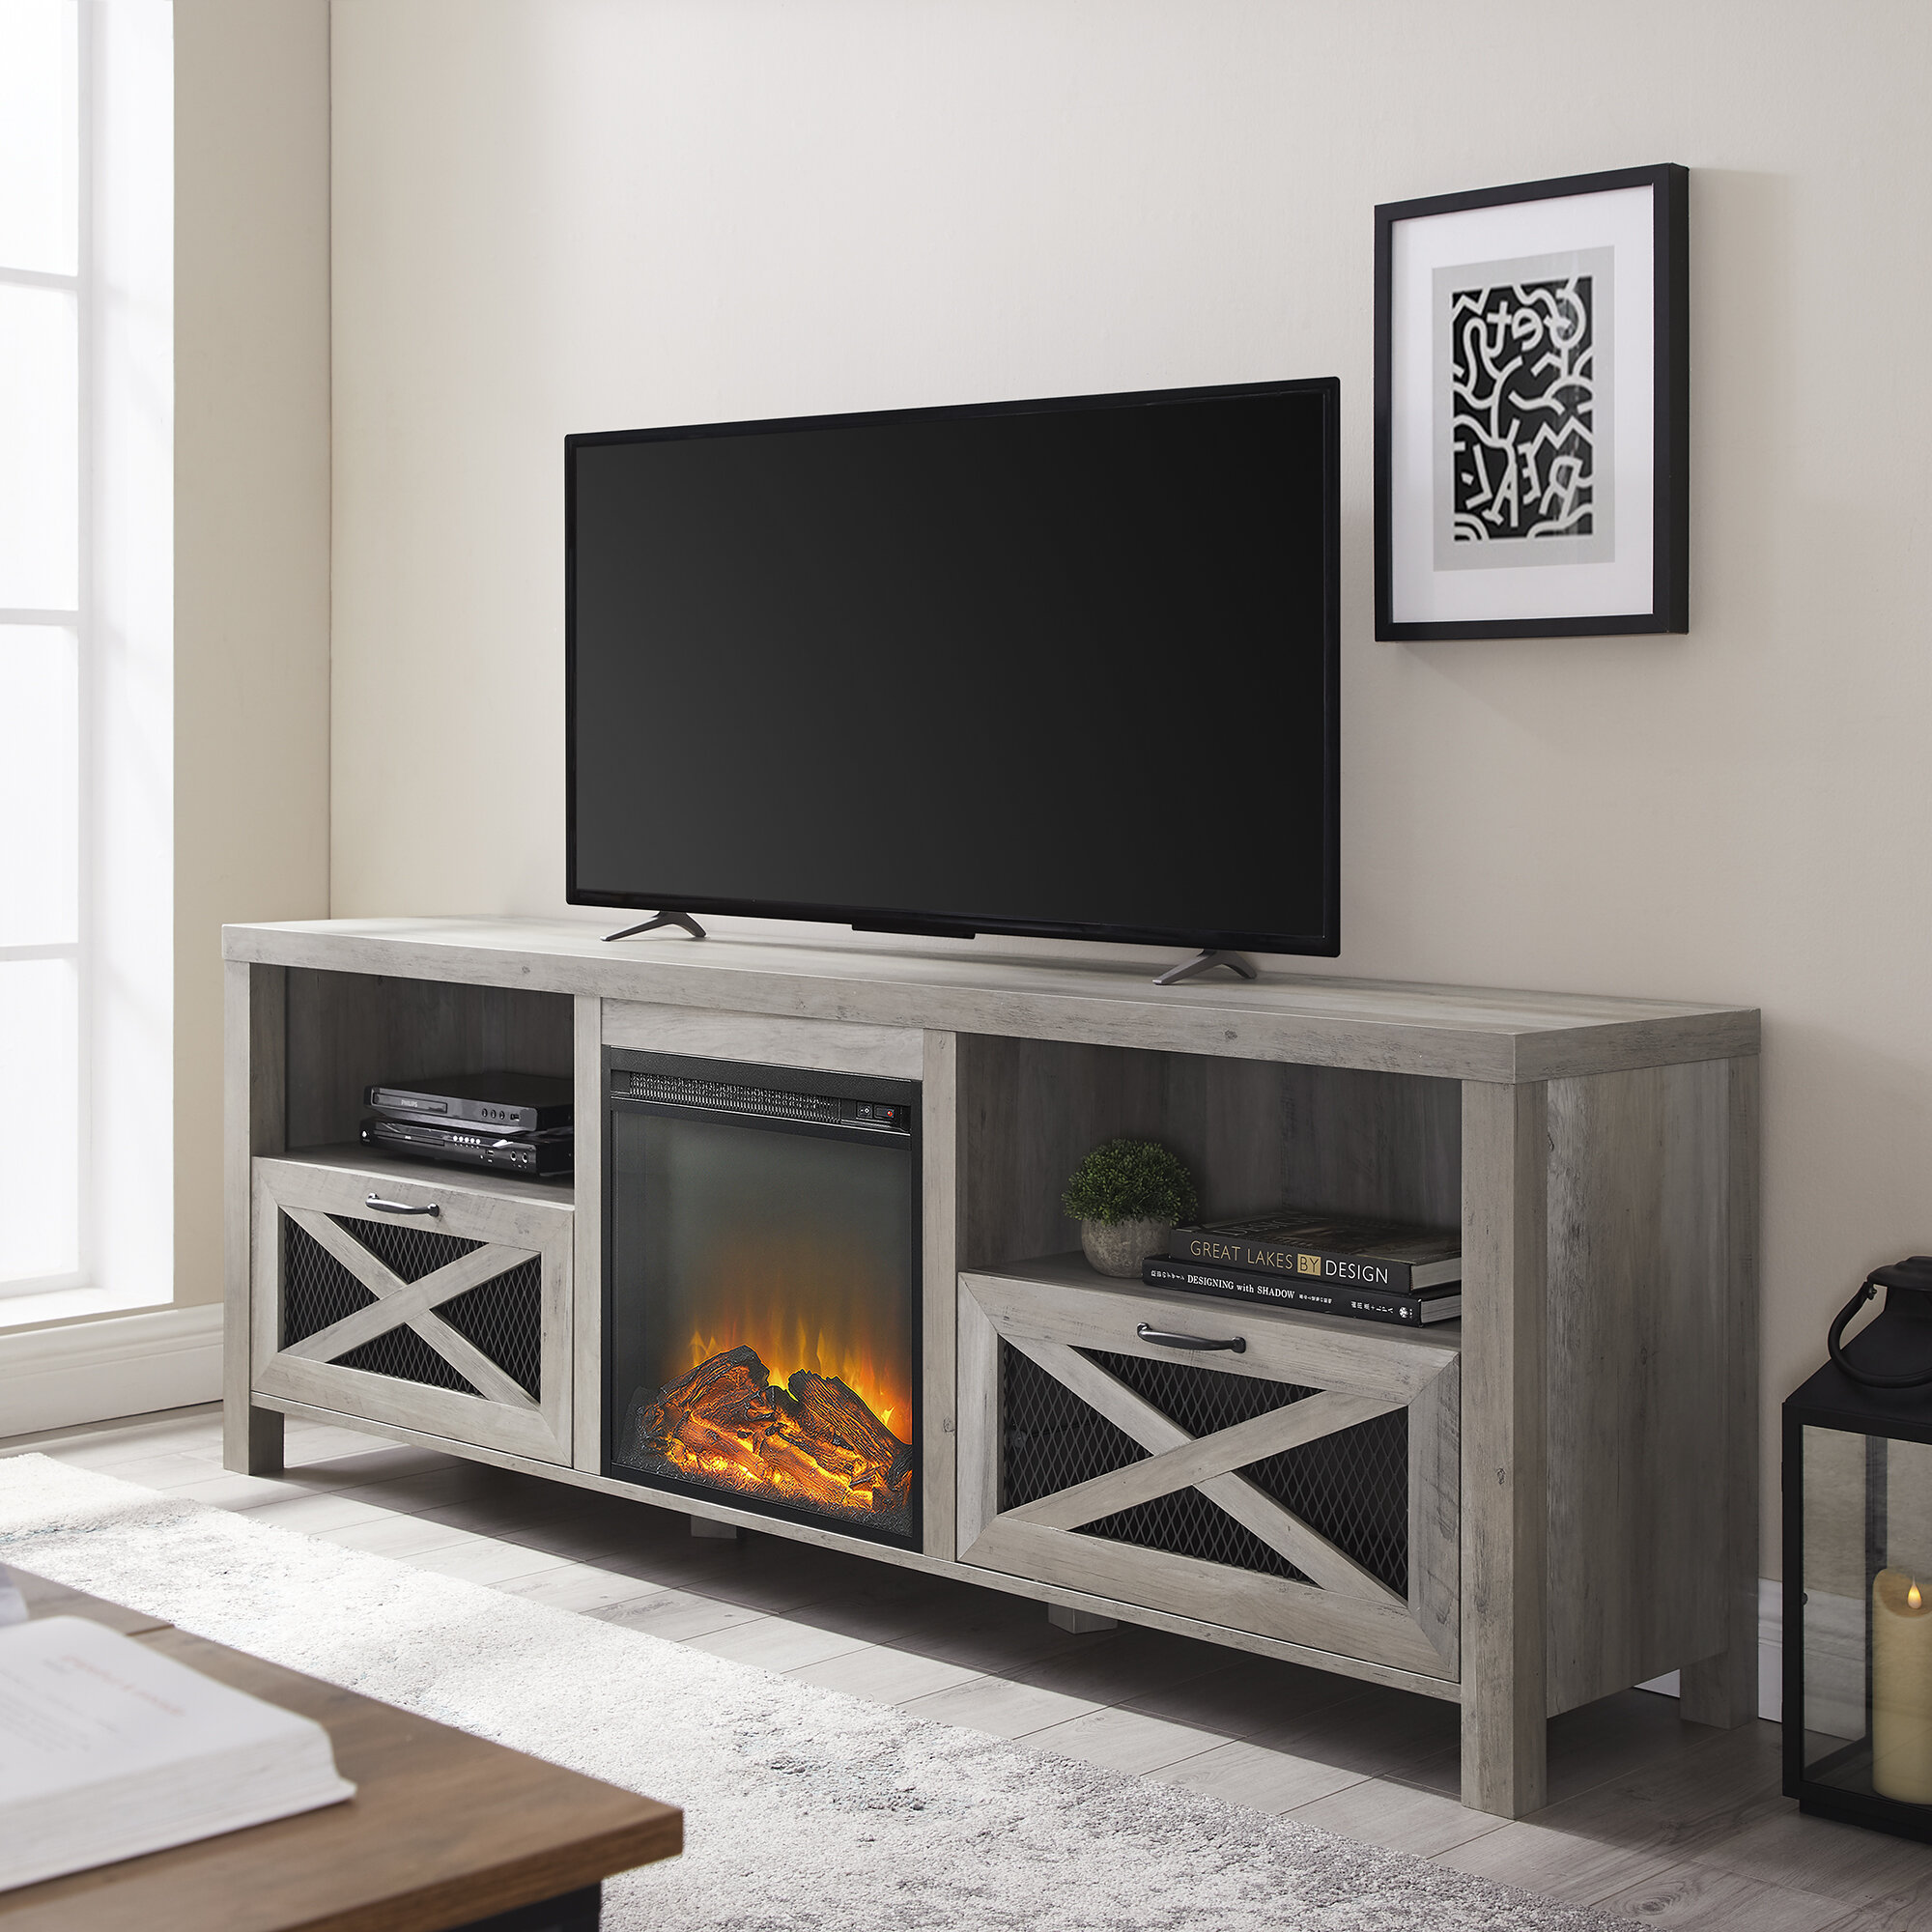 Tv Above Electric Fireplace Inspirational Fireplace Gracie Oaks Tv Stands You Ll Love In 2019